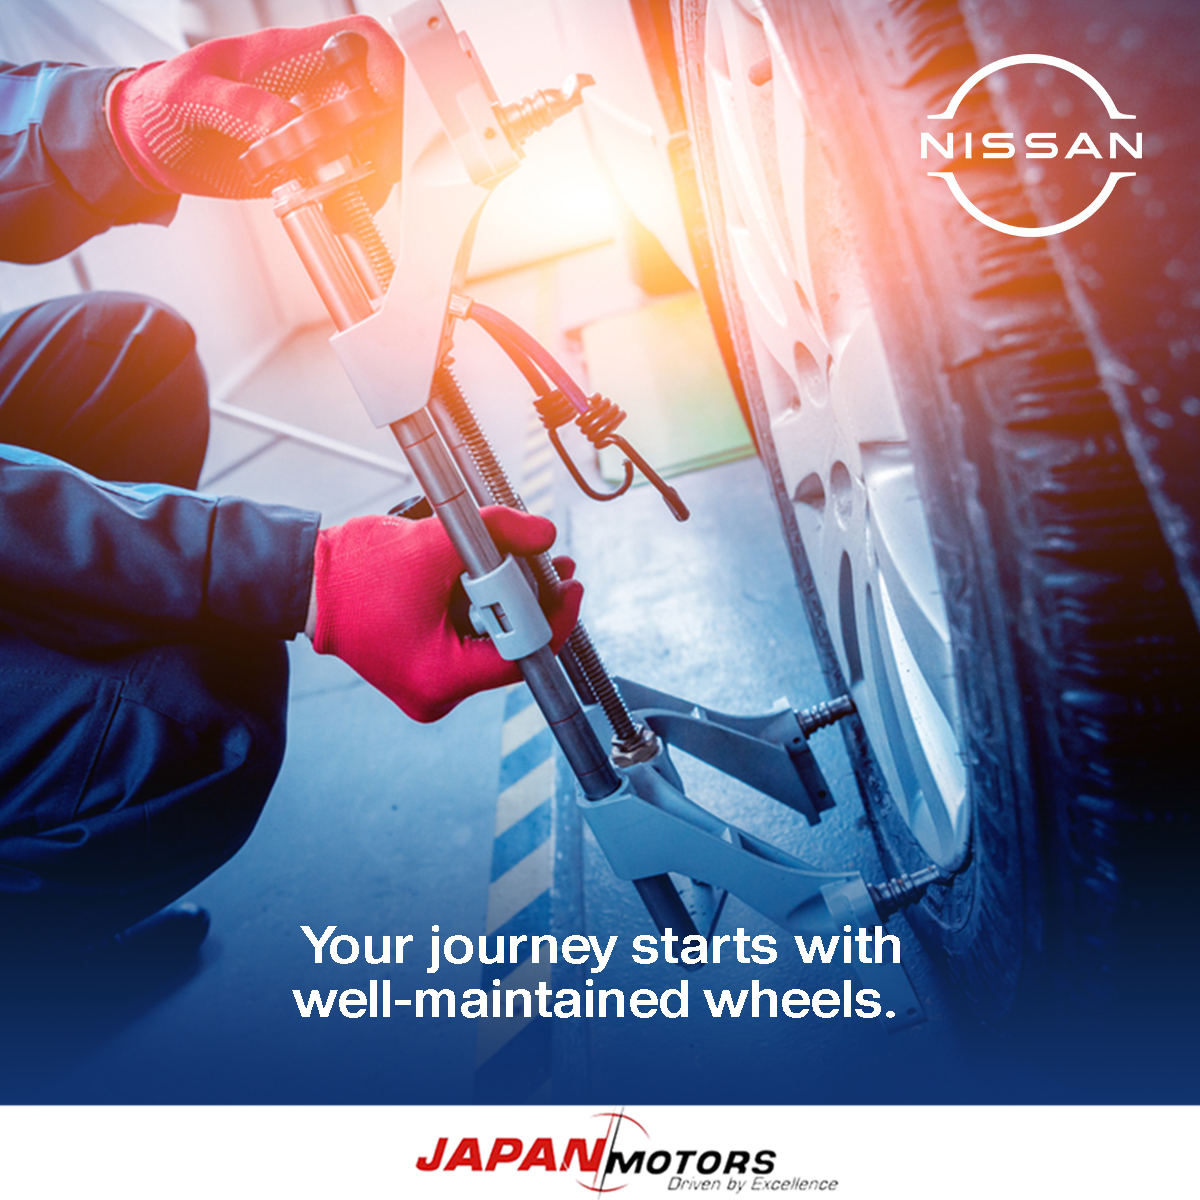 Safety first! Ensure optimal tyre pressure for a smoother drive and better fuel efficiency. Your journey starts with well-maintained wheels.👌 Book a service: nissanghana.com/en/nissan-owne… #JapanMotors #NissanGhana #SolidarityForever #Nissan #NissanCares #roadsefty #vehcilecare